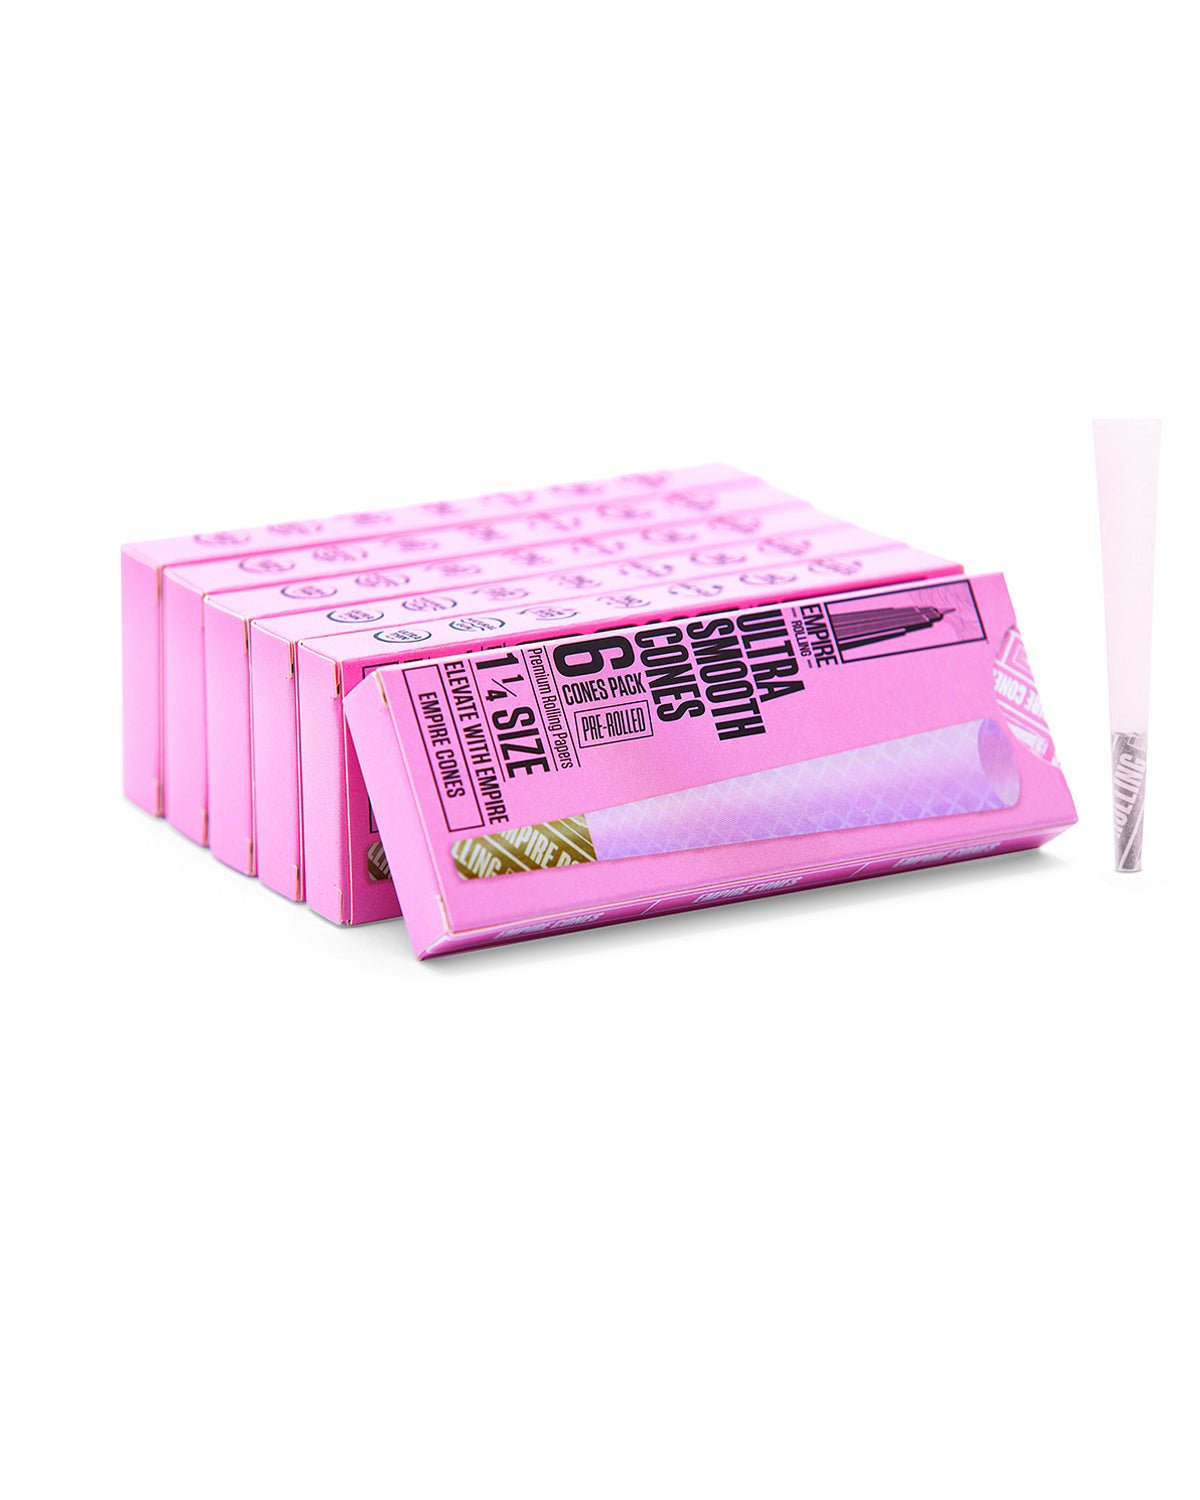 Empire Rolling's King Size Organic Hemp Rolling Papers, eco-friendly and crafted with high-quality, natural materials for a premium smoking experience.UltraSmooth Pink 1.25 Size 6-Count - Empire Rolling Papers